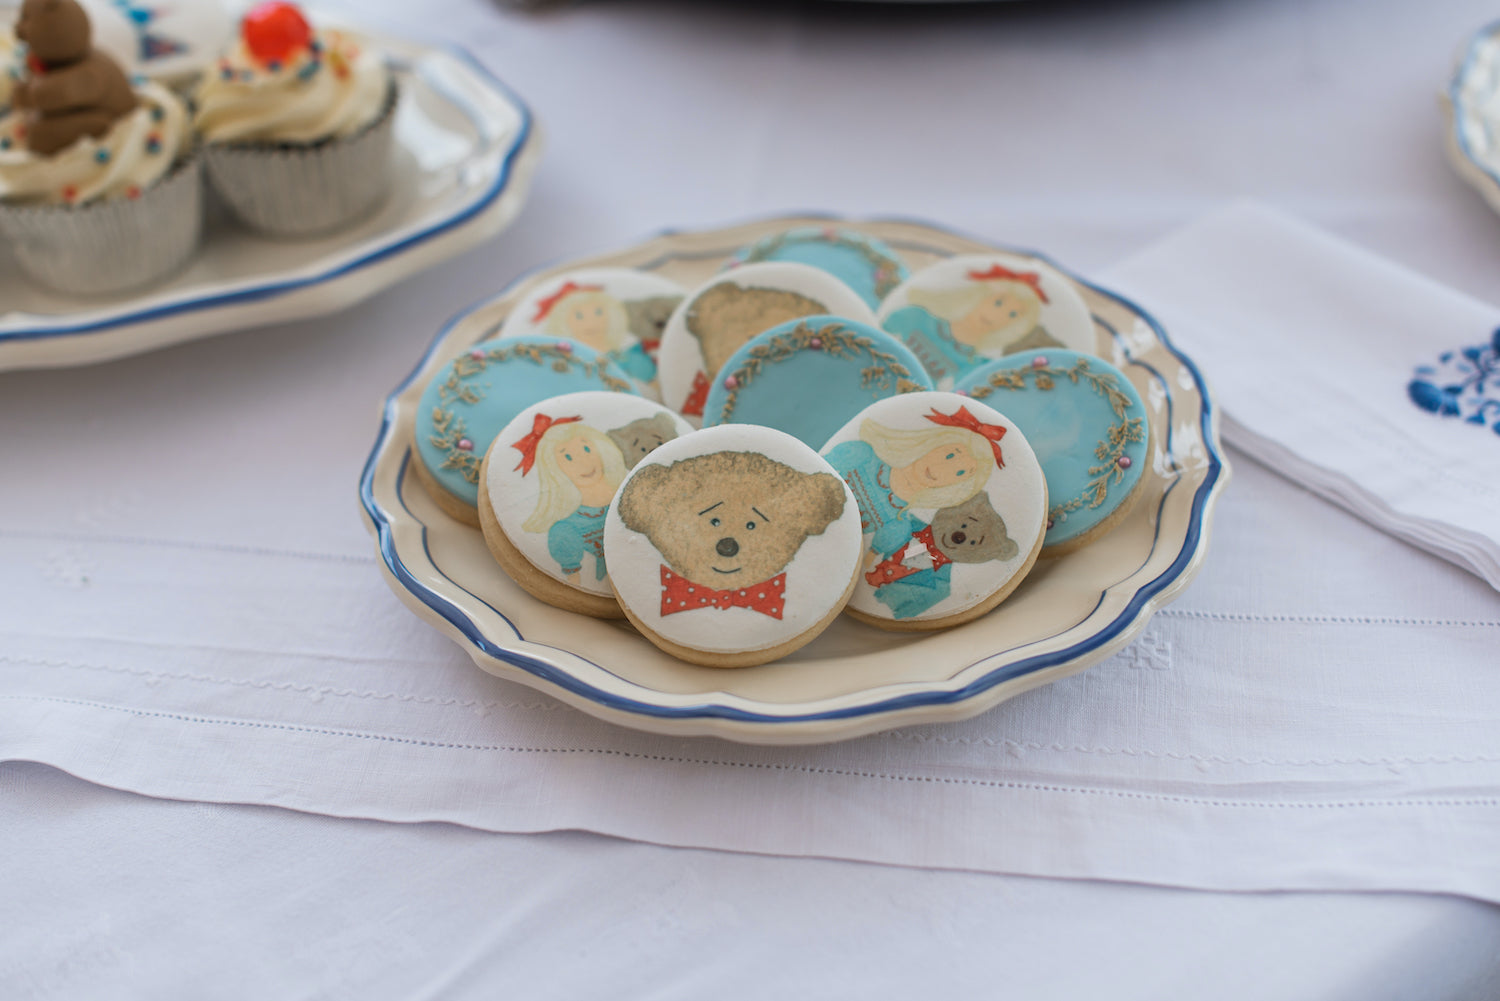 Charlotte and Burlington bear party biscuits